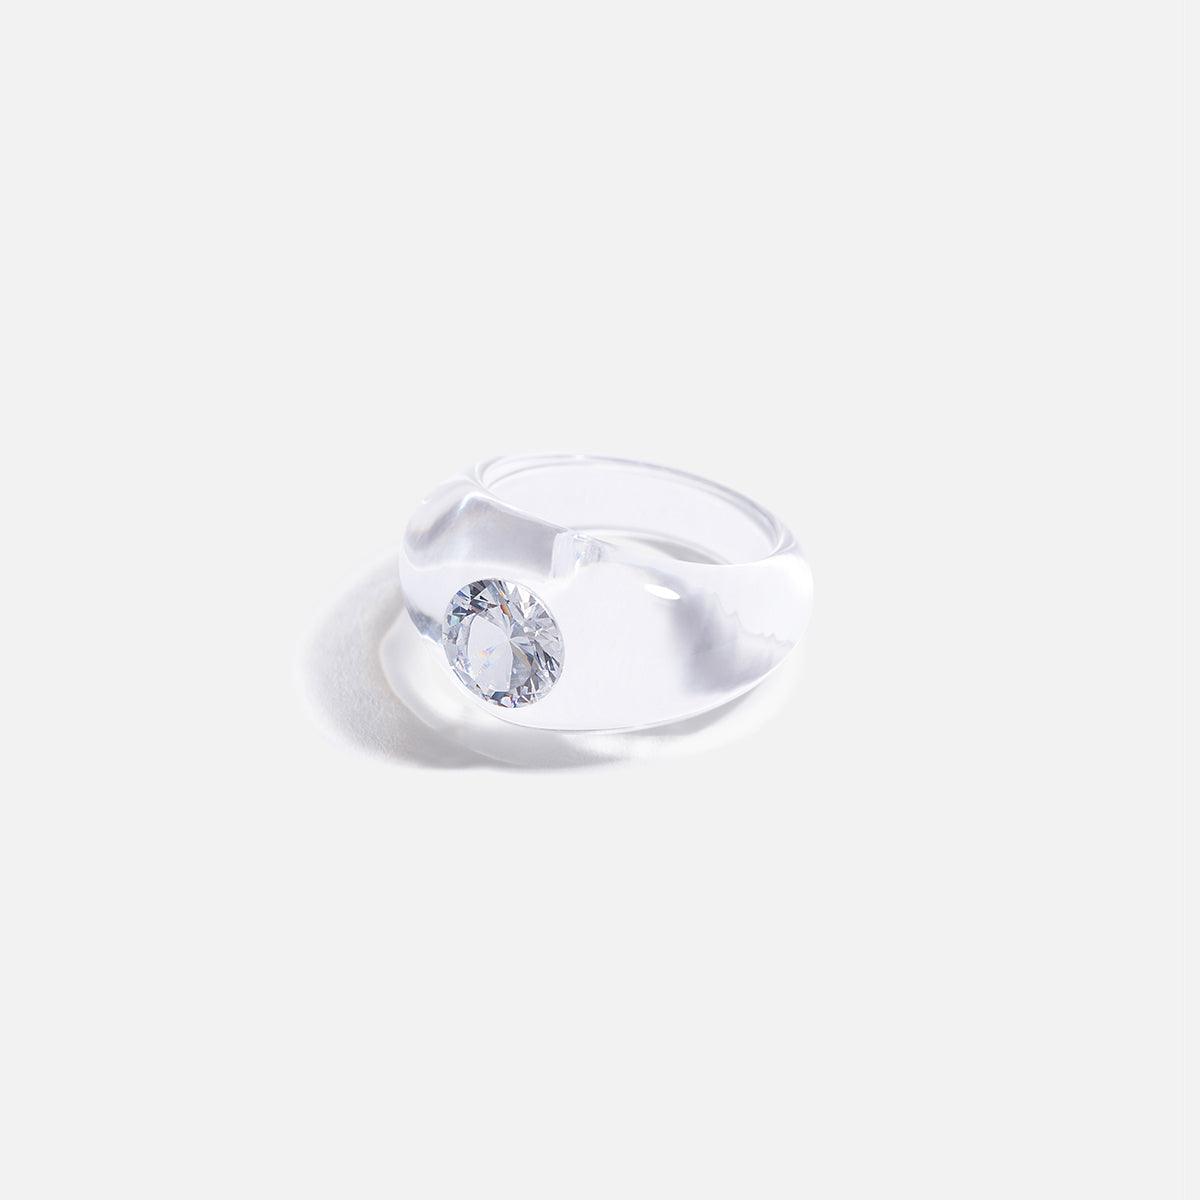 Sarah Noor Astro Ring, Clear - At Present Jewelry